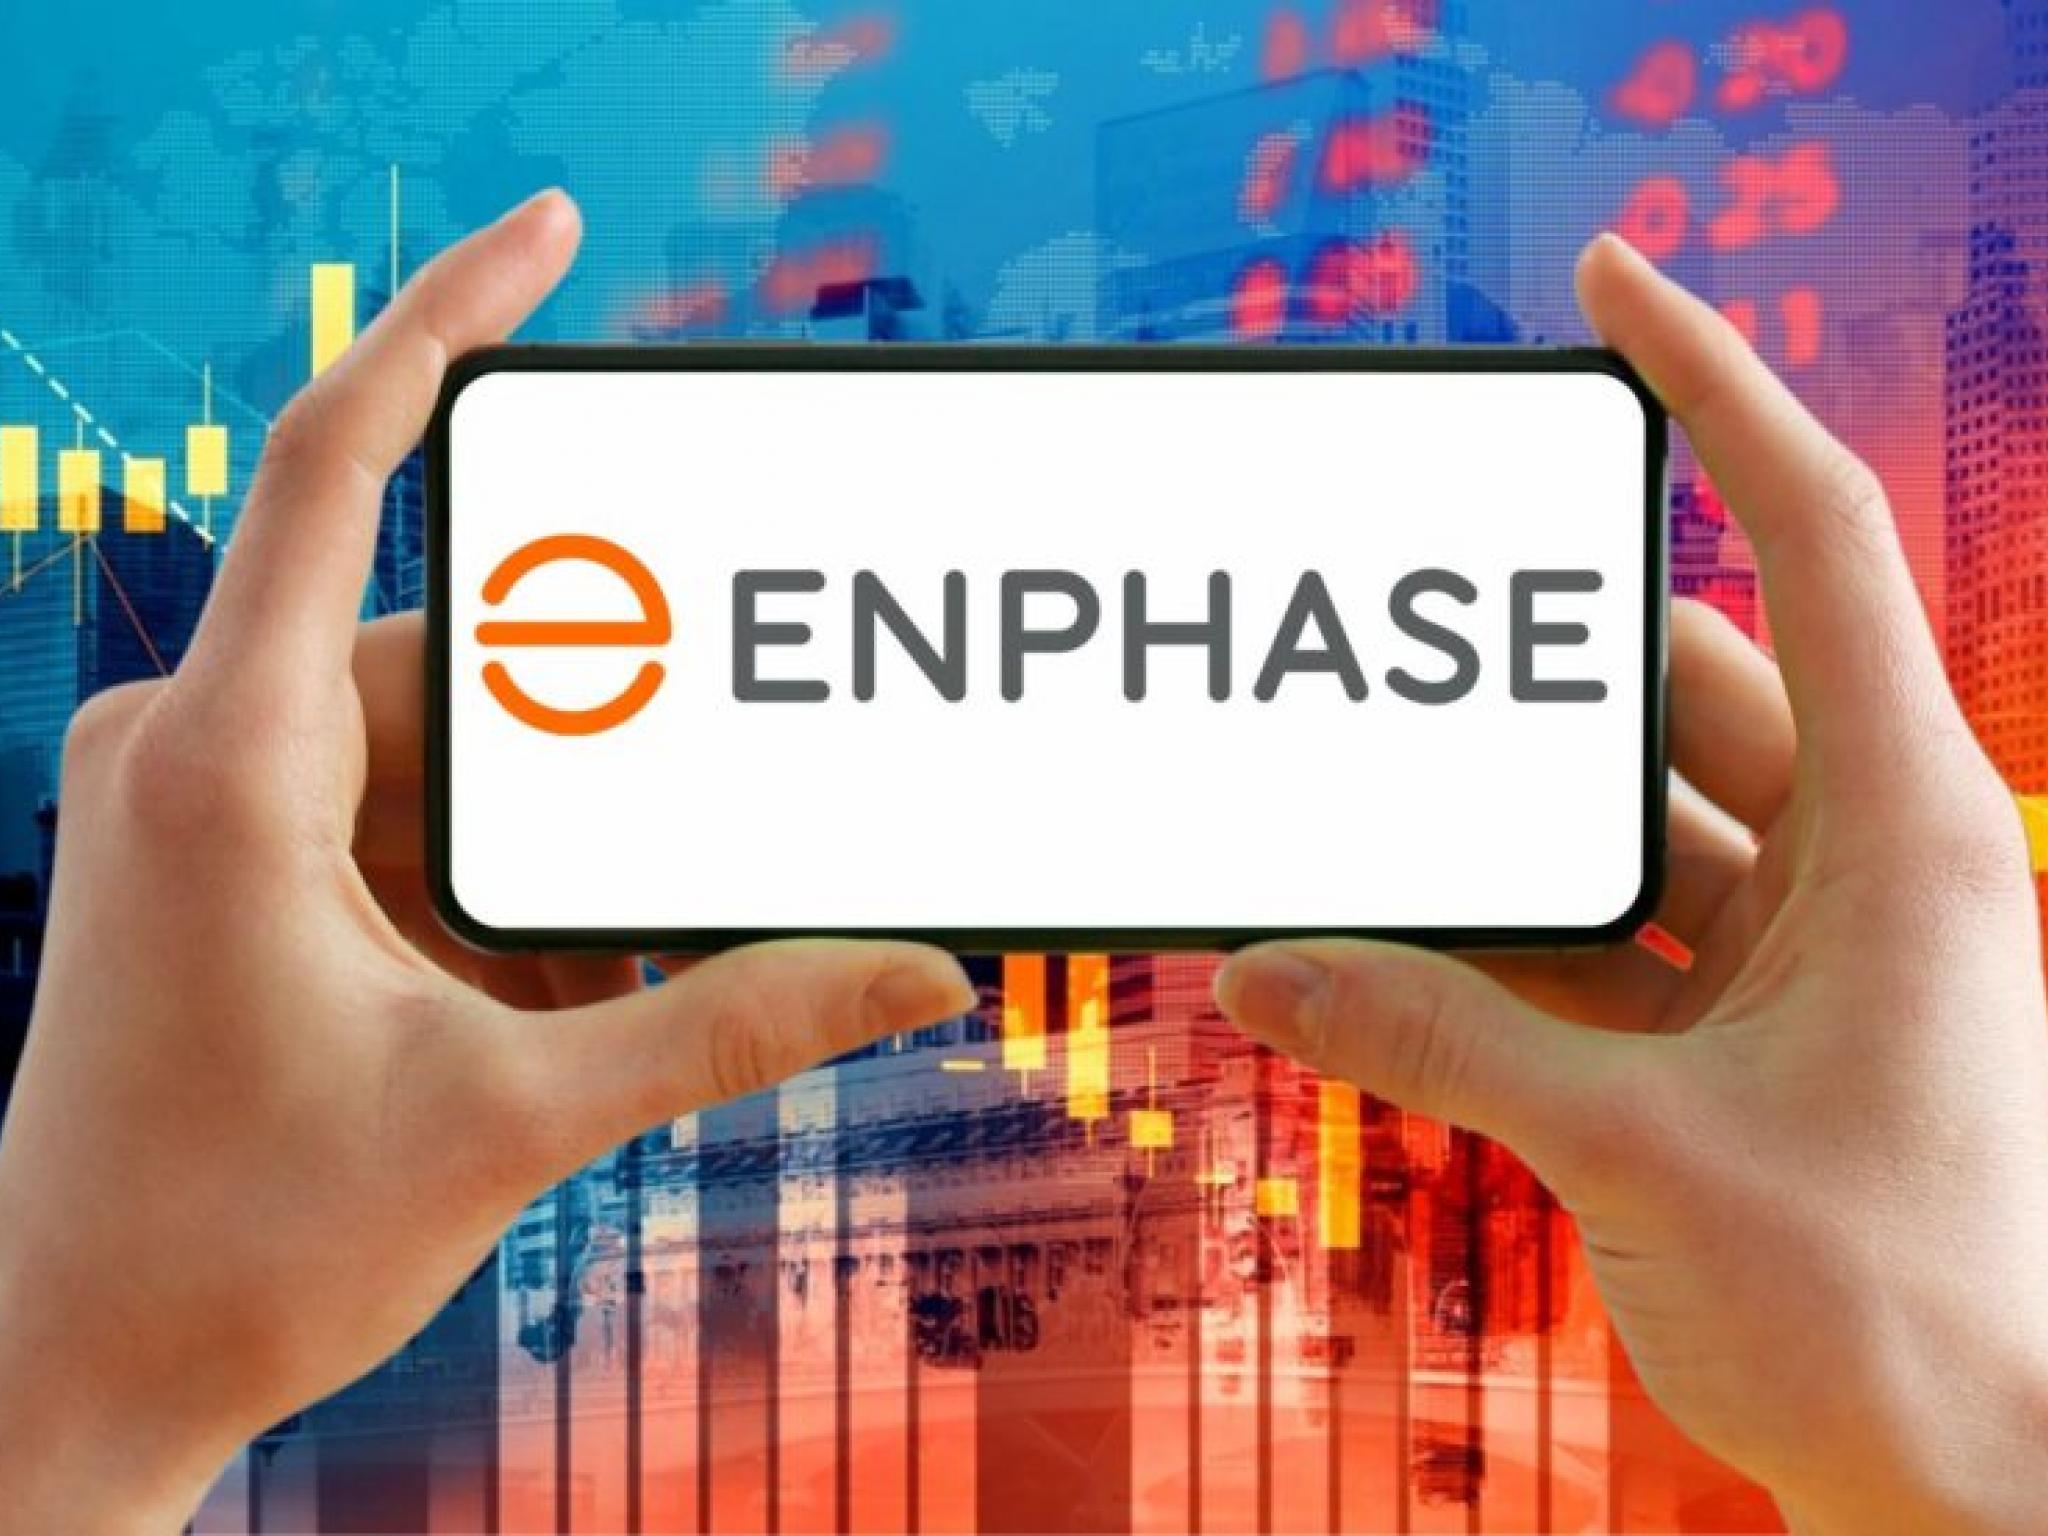  whats-going-on-with-enphase-energy-stock-today 